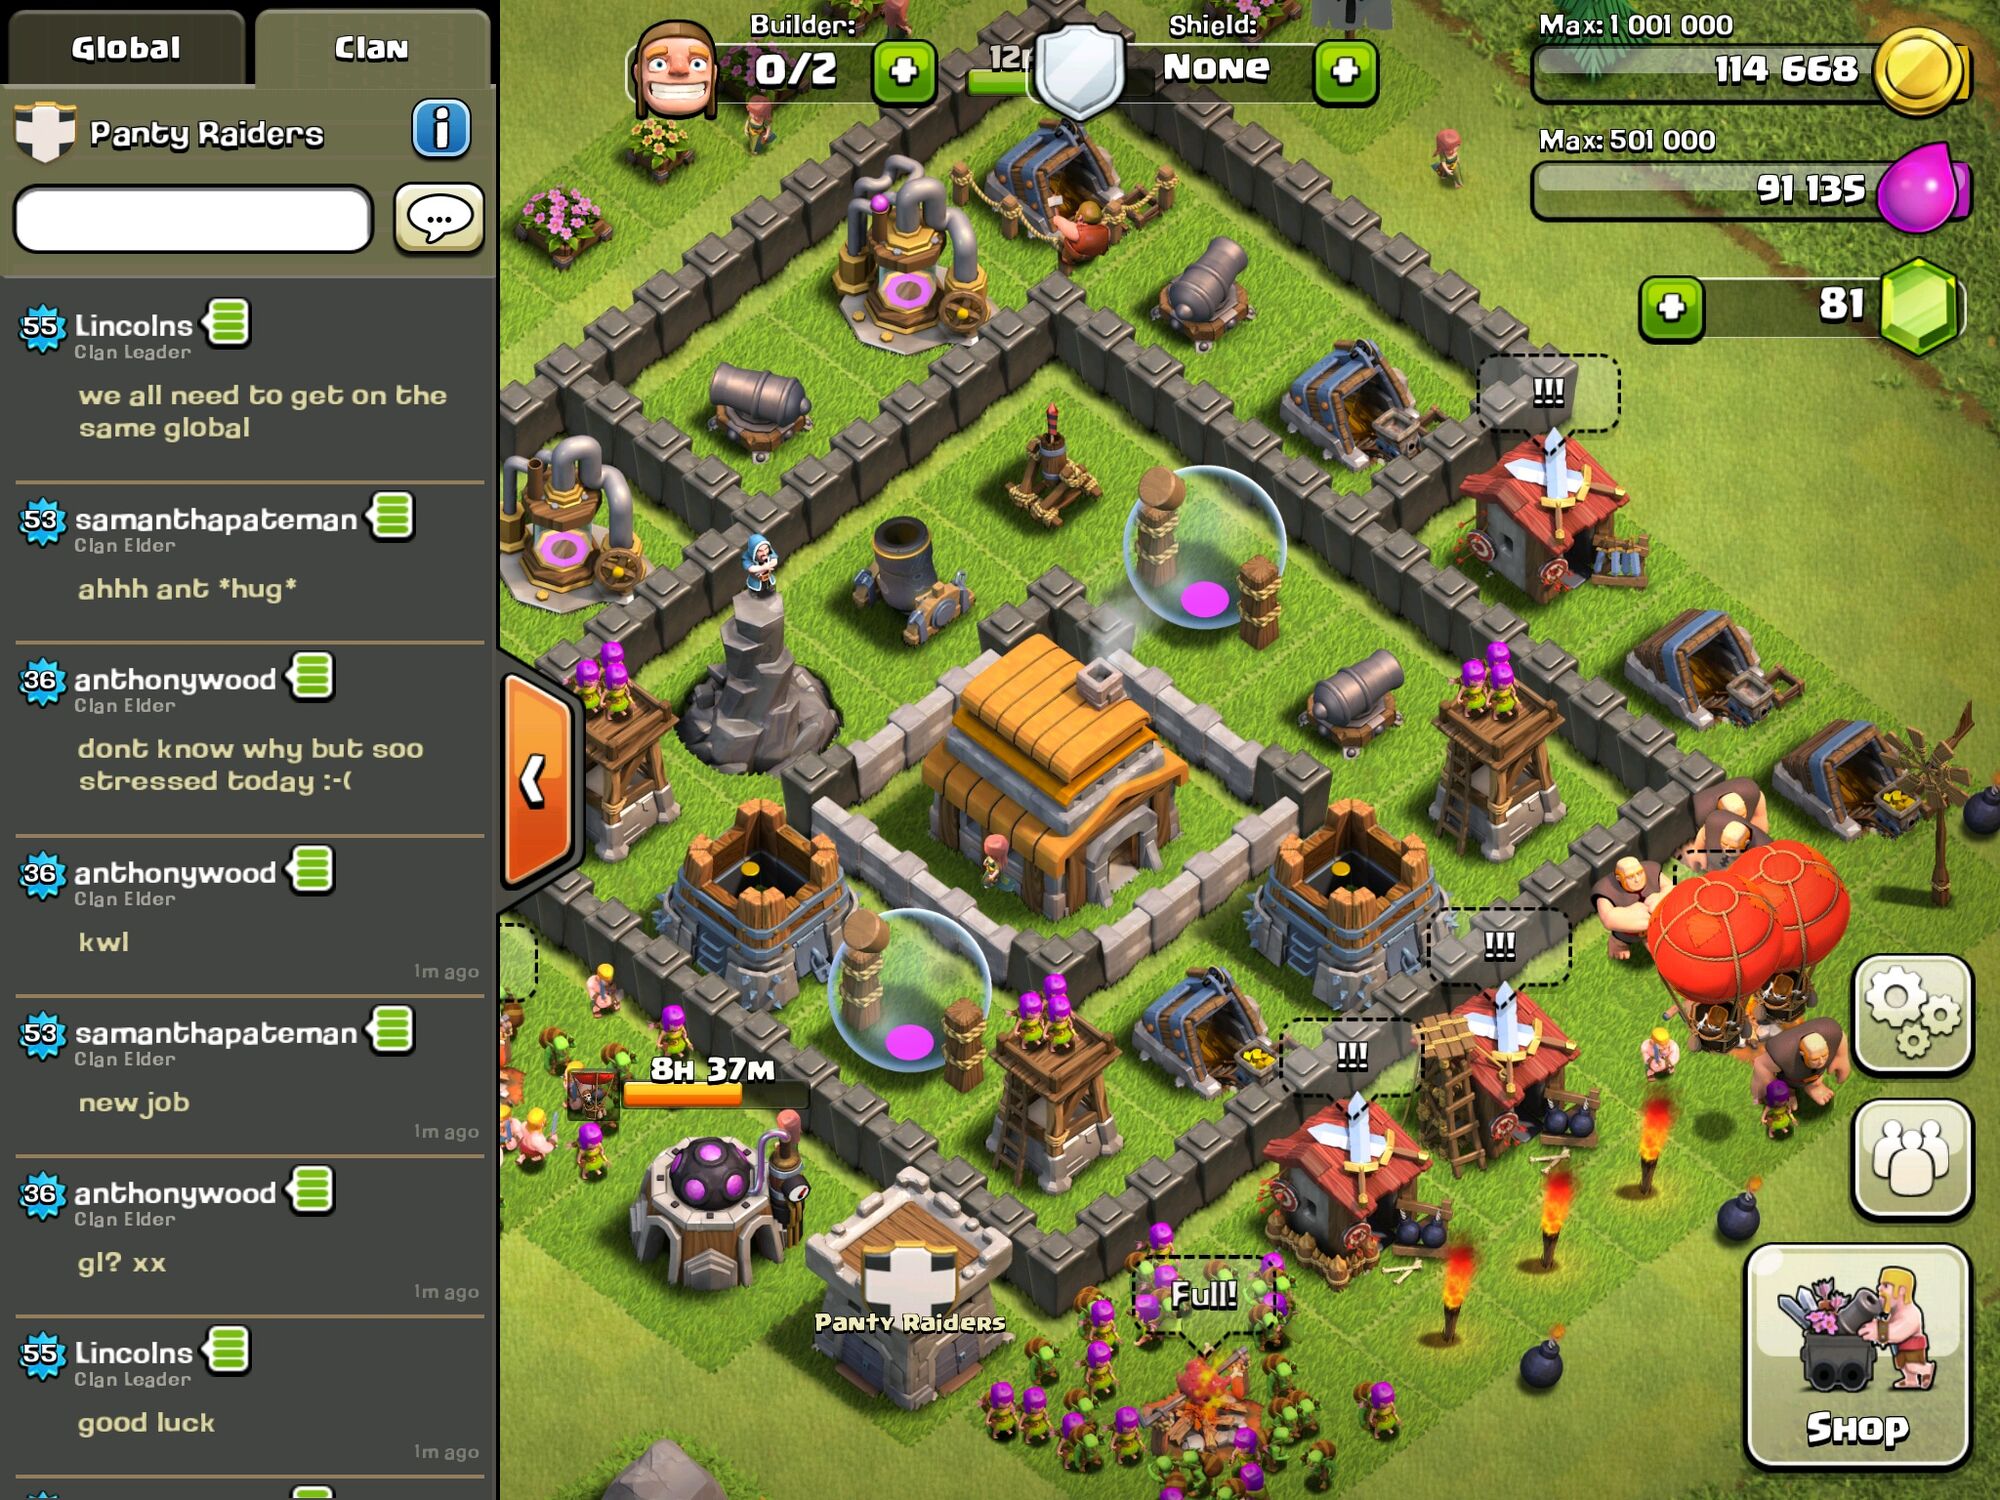 Clash of Clans Интерфейс. Clash of Clans UI. Ратуша 4 уровня. Clash of Clans ПЕККА. Supercell's clash of clans